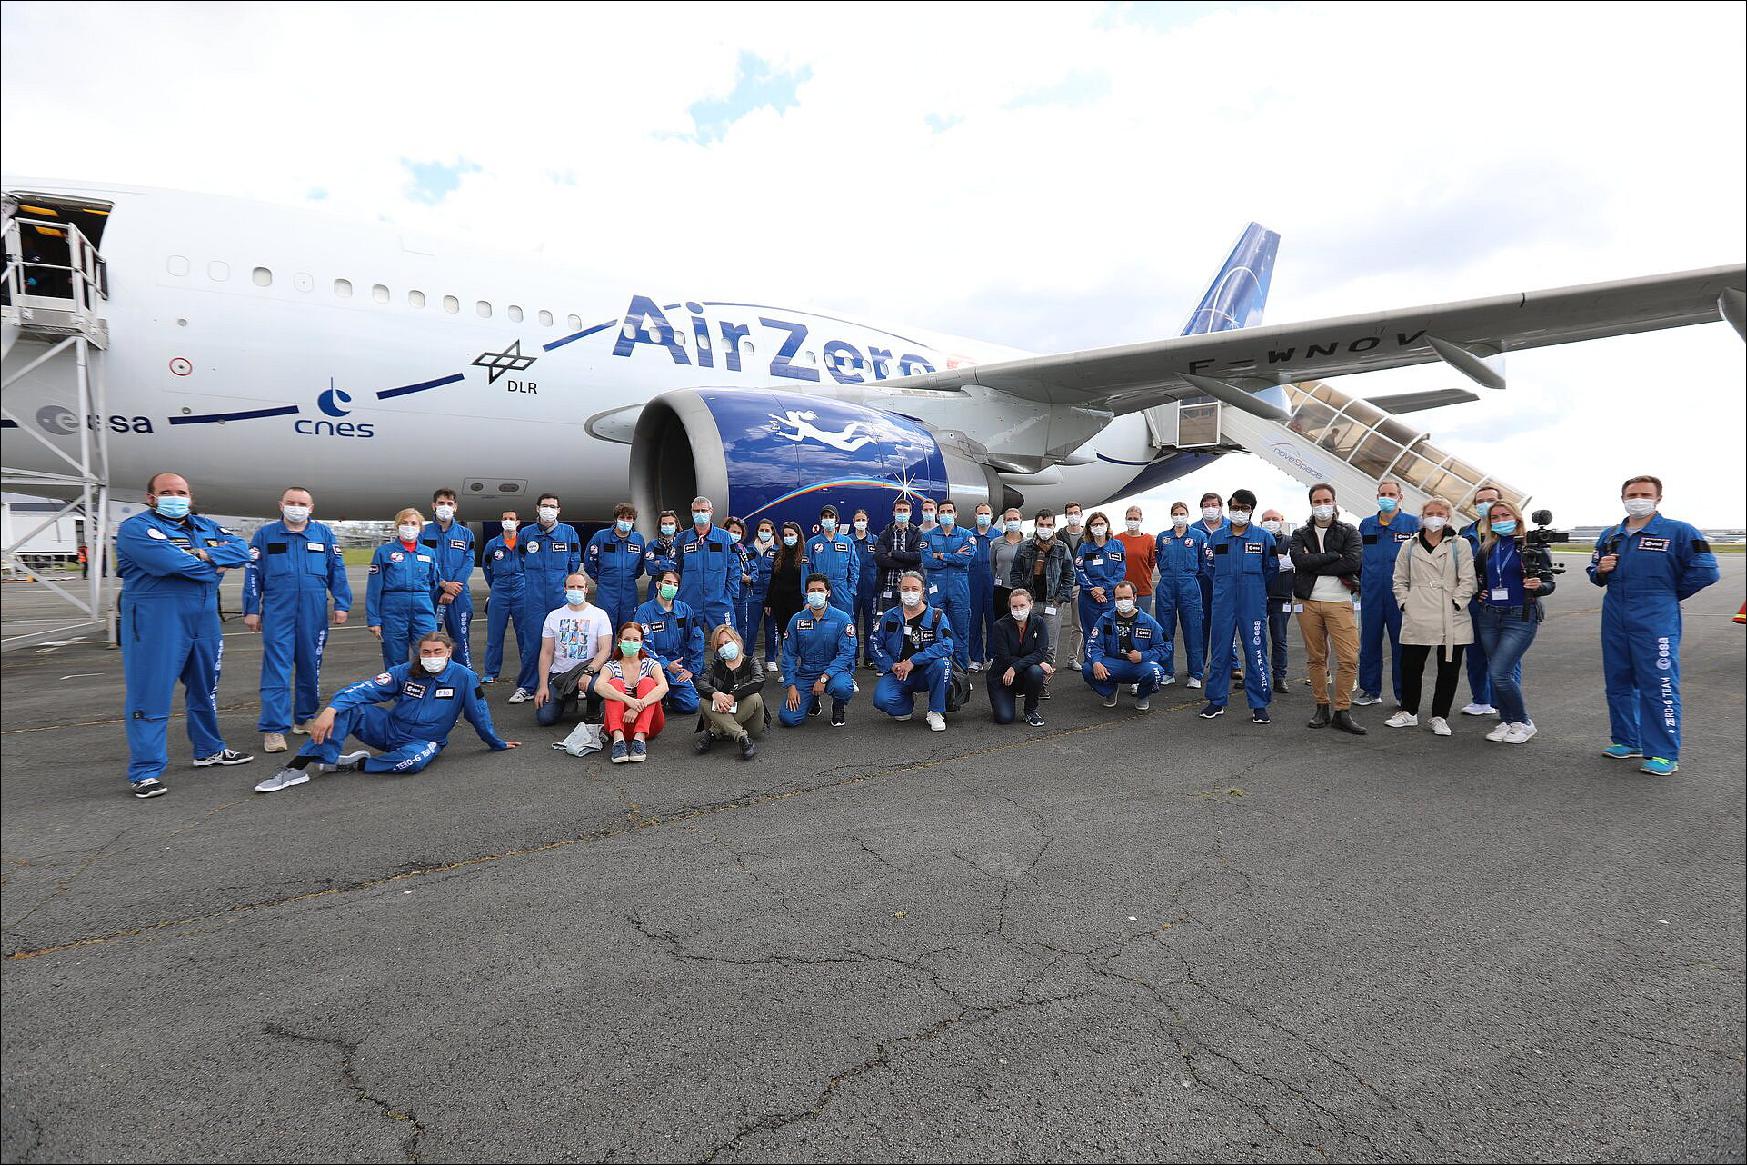 Figure 3: Researchers take a group photo in front of the Air Zero G aircraft to mark the end of the 75th ESA parabolic flight campaign. The campaign was the third to take place under COVID-19 restrictions, and ran from 21 to 30 April in Bordeaux, France (image credit: Novespace)